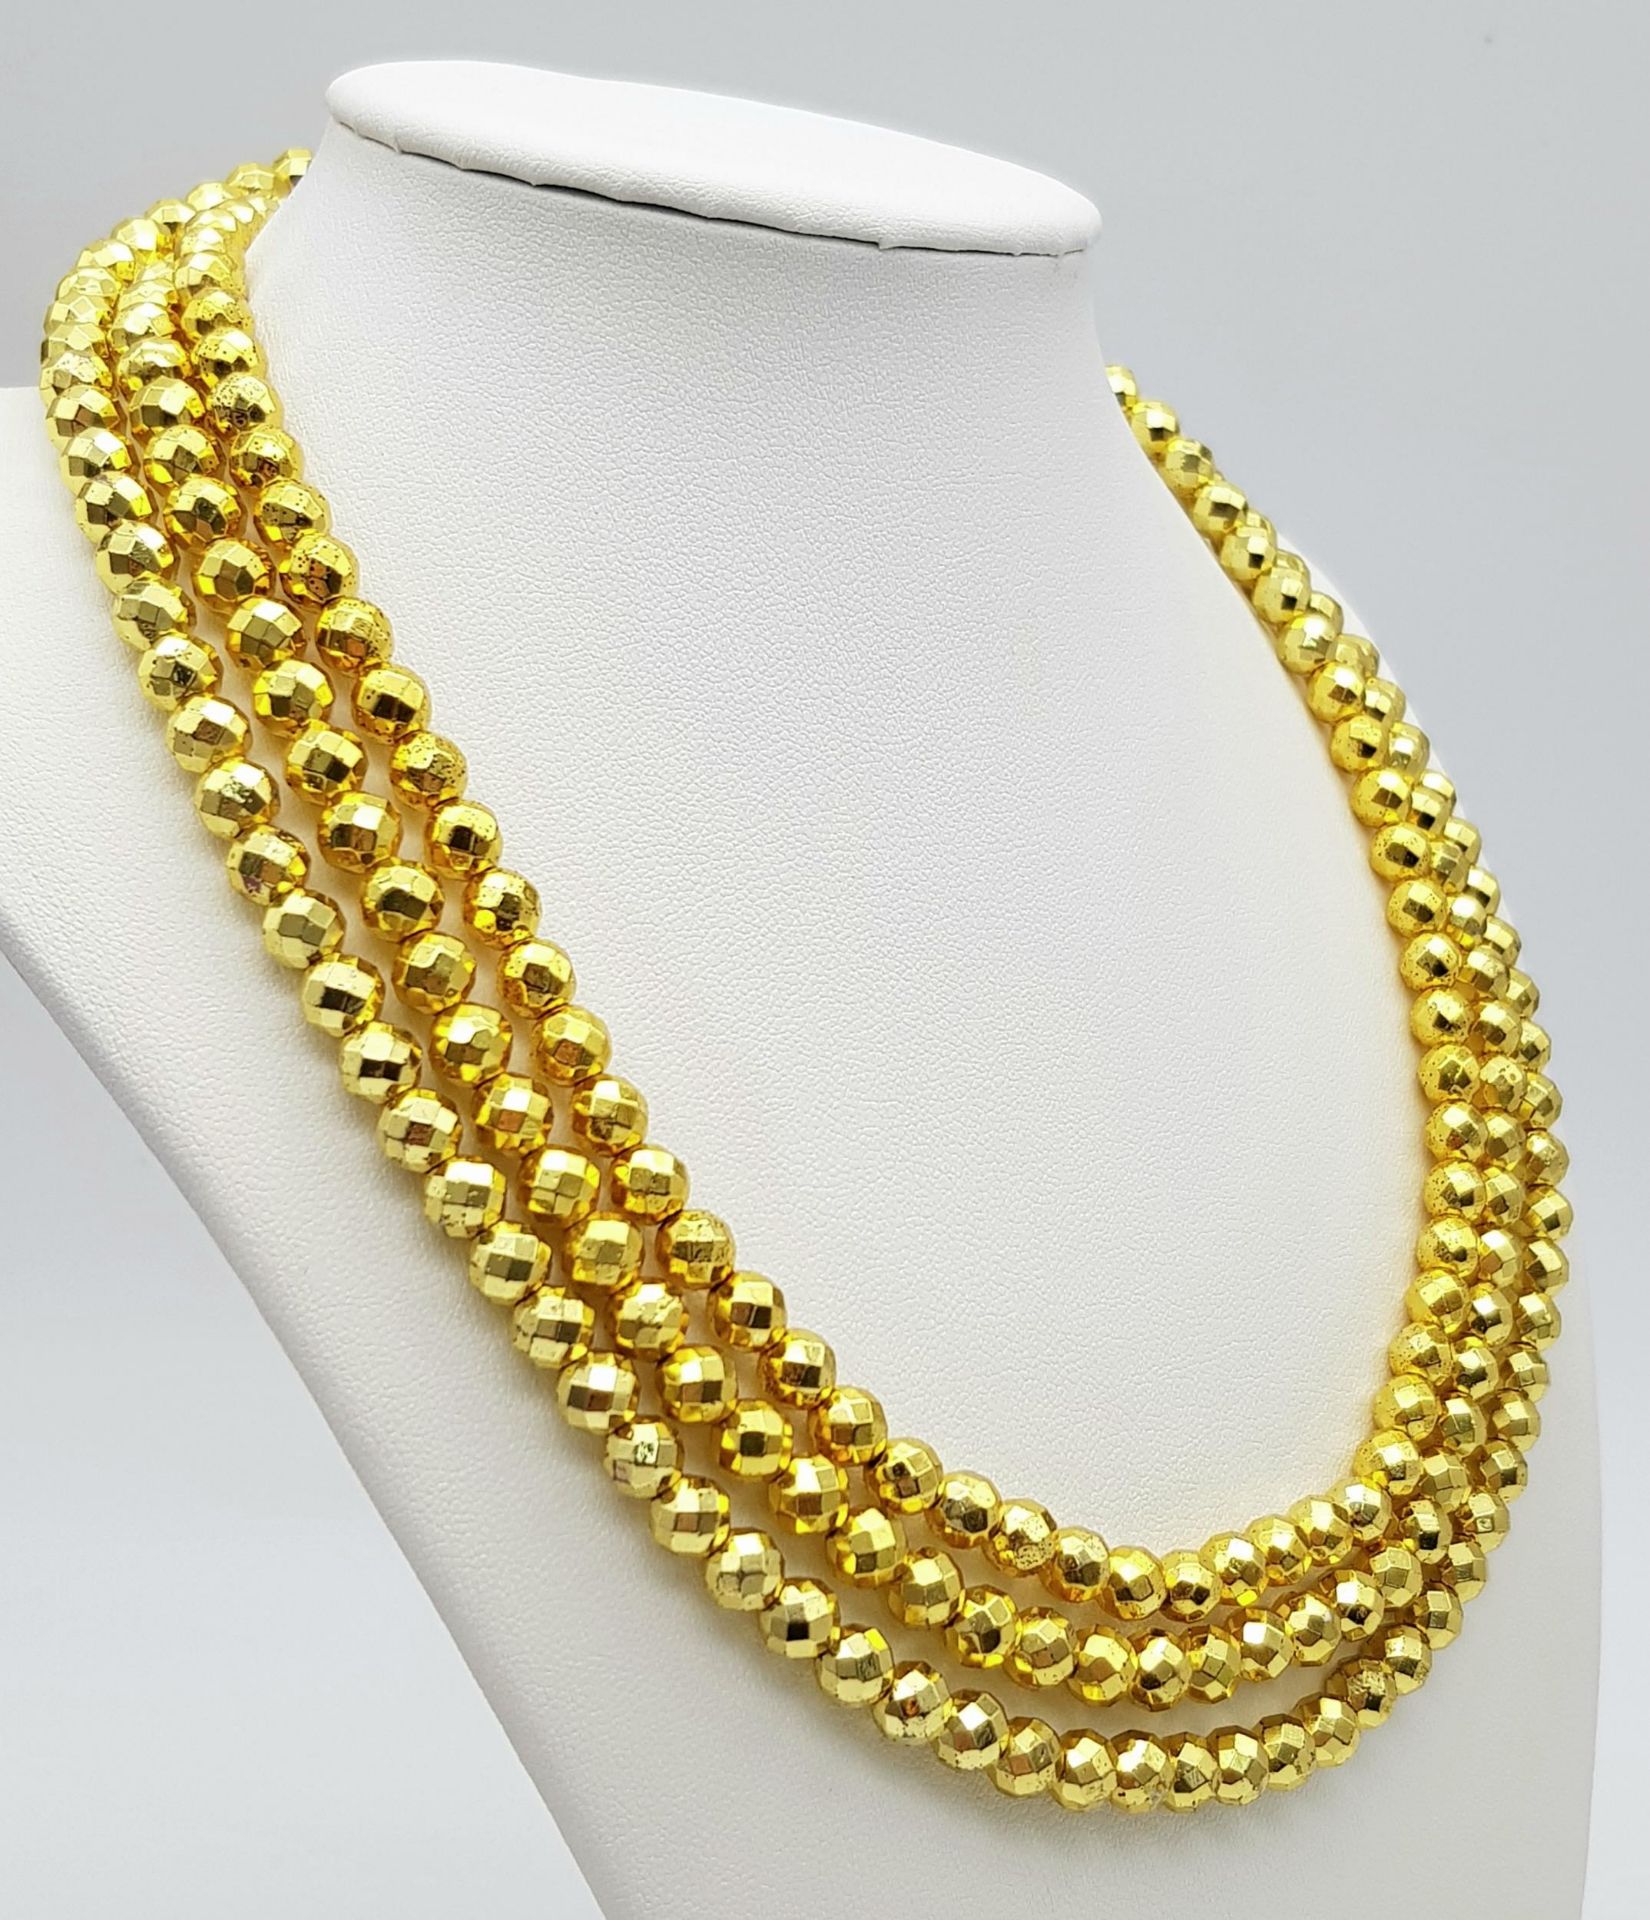 A Limited Edition (1 of 200), 679.65 Carat, Gold Haematite Bead Necklace. Fully Certified - Image 2 of 5